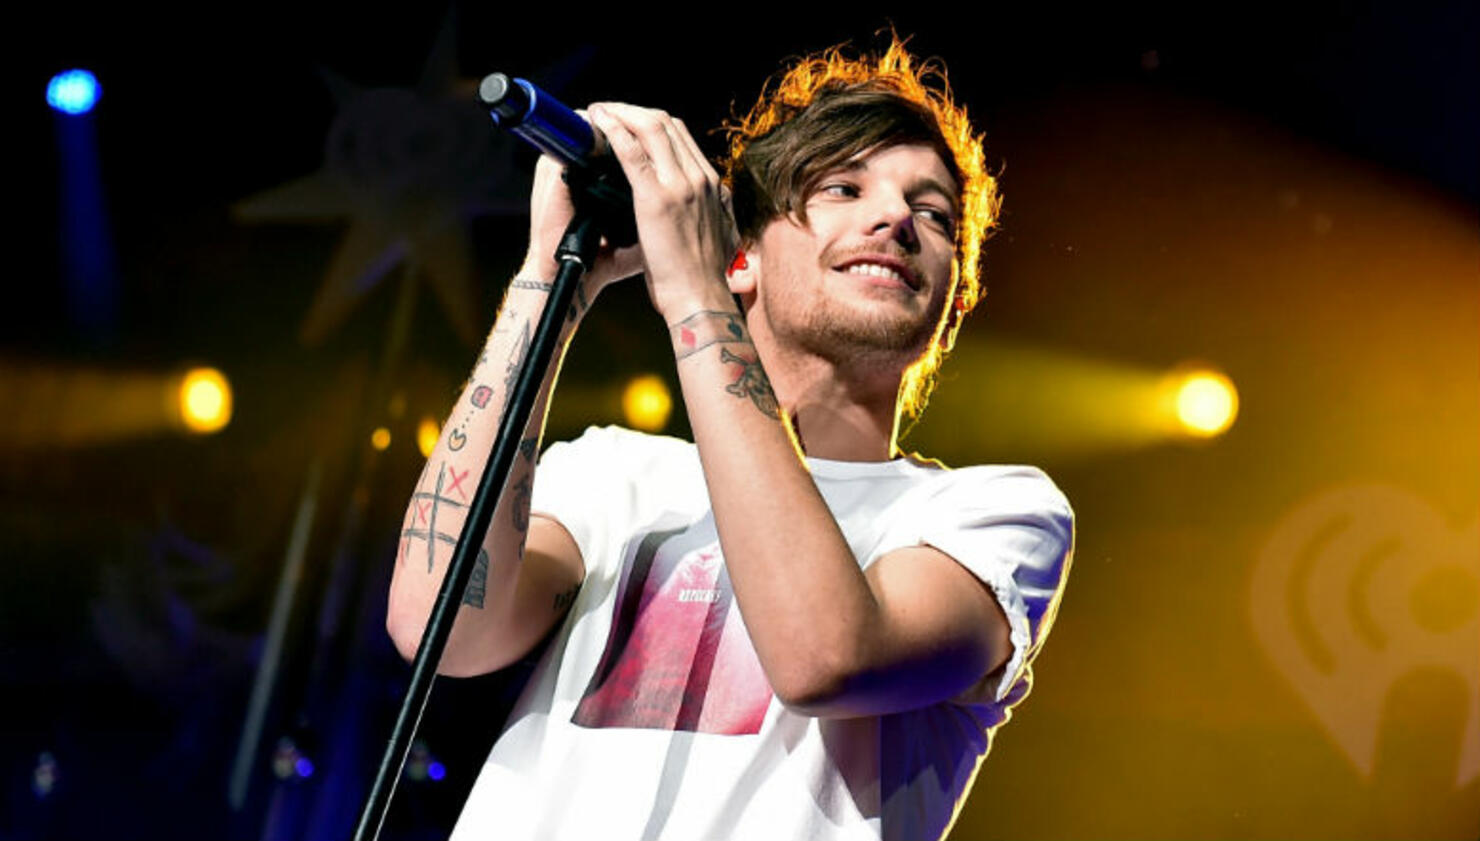 Louis Tomlinson releases new single 'Two of Us